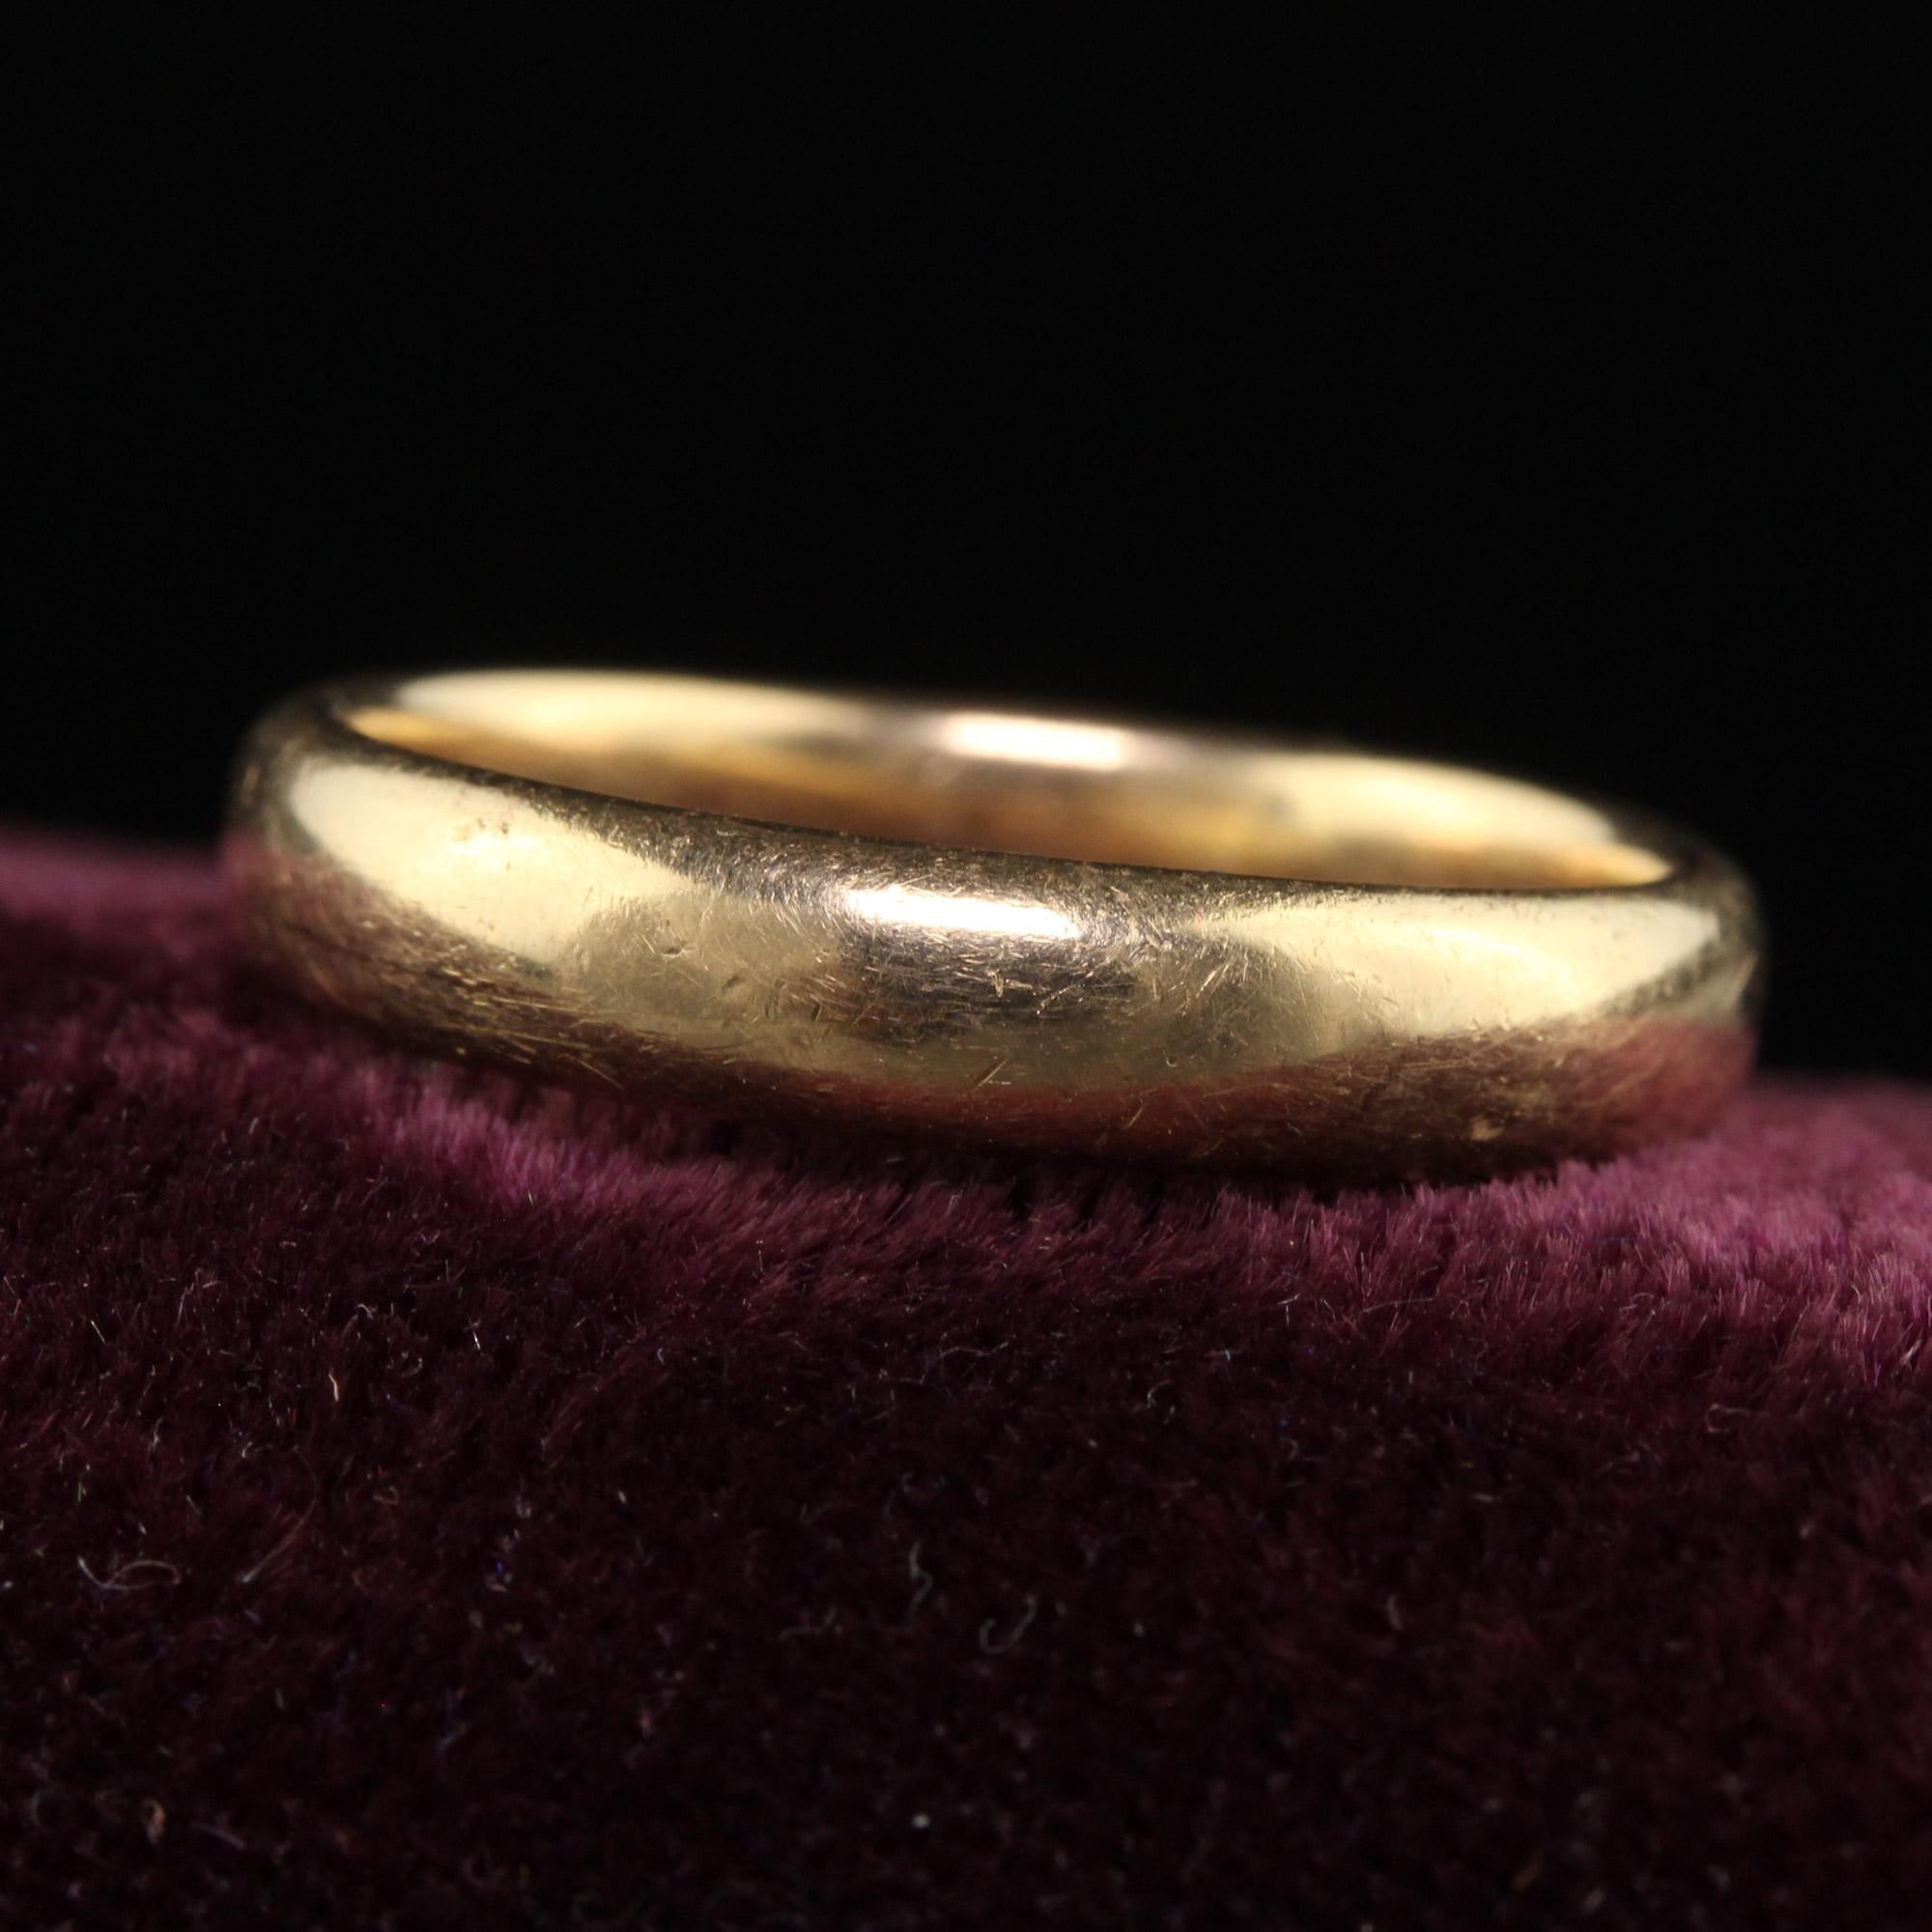 Beautiful Antique Art Deco 14K Yellow Gold Classic Plain Wedding Band - Size 8 1/4. This classic wedding band is crafted in 14k yellow gold. This wedding band is in good condition with light scratches around the ring with a nice patina due to age.